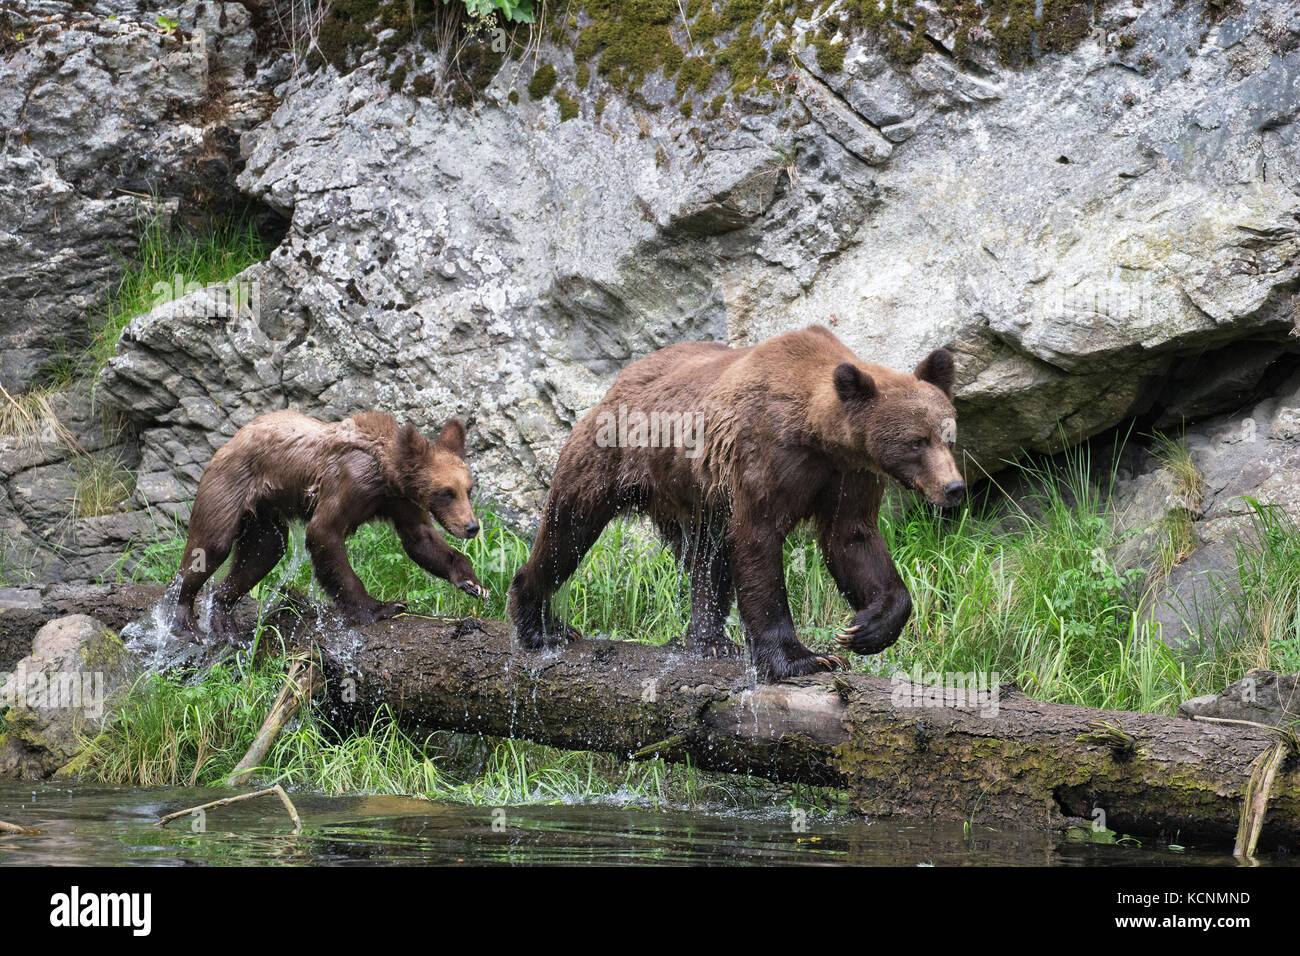 Grizzly bear (Ursus arctos horriblis), female and yearling cub, Khutzeymateen Grizzly Bear Sanctuary, British Columbia, Canada. Stock Photo